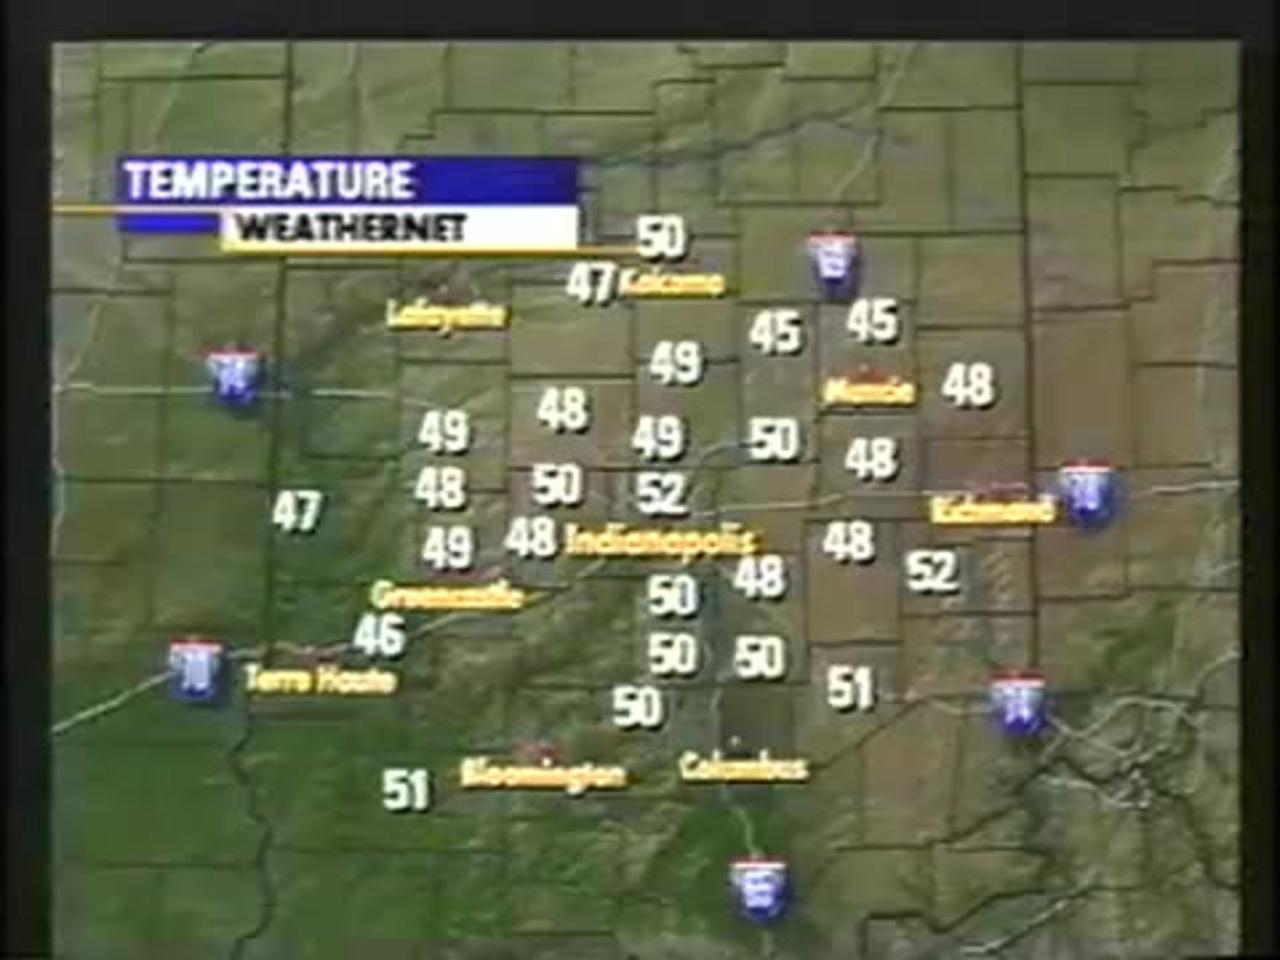 March 20, 2001 - Steve Bray 3PM Indianapolis Weather Update